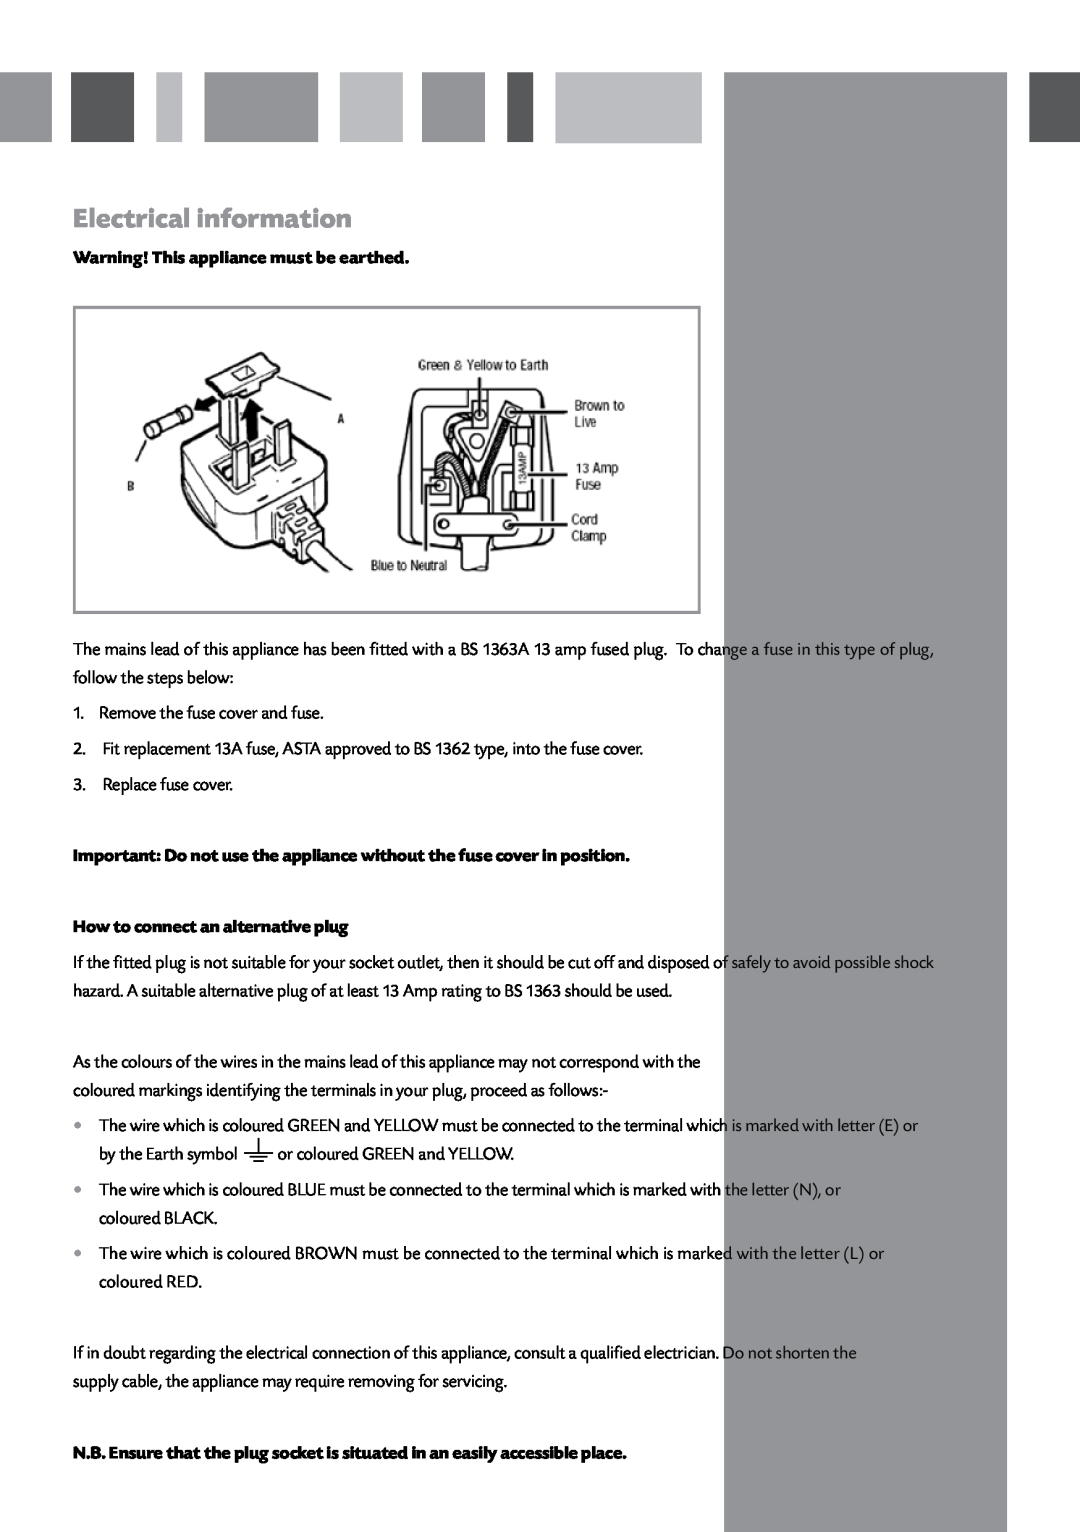 CDA FW221 manual Electrical information, Warning! This appliance must be earthed, How to connect an alternative plug 